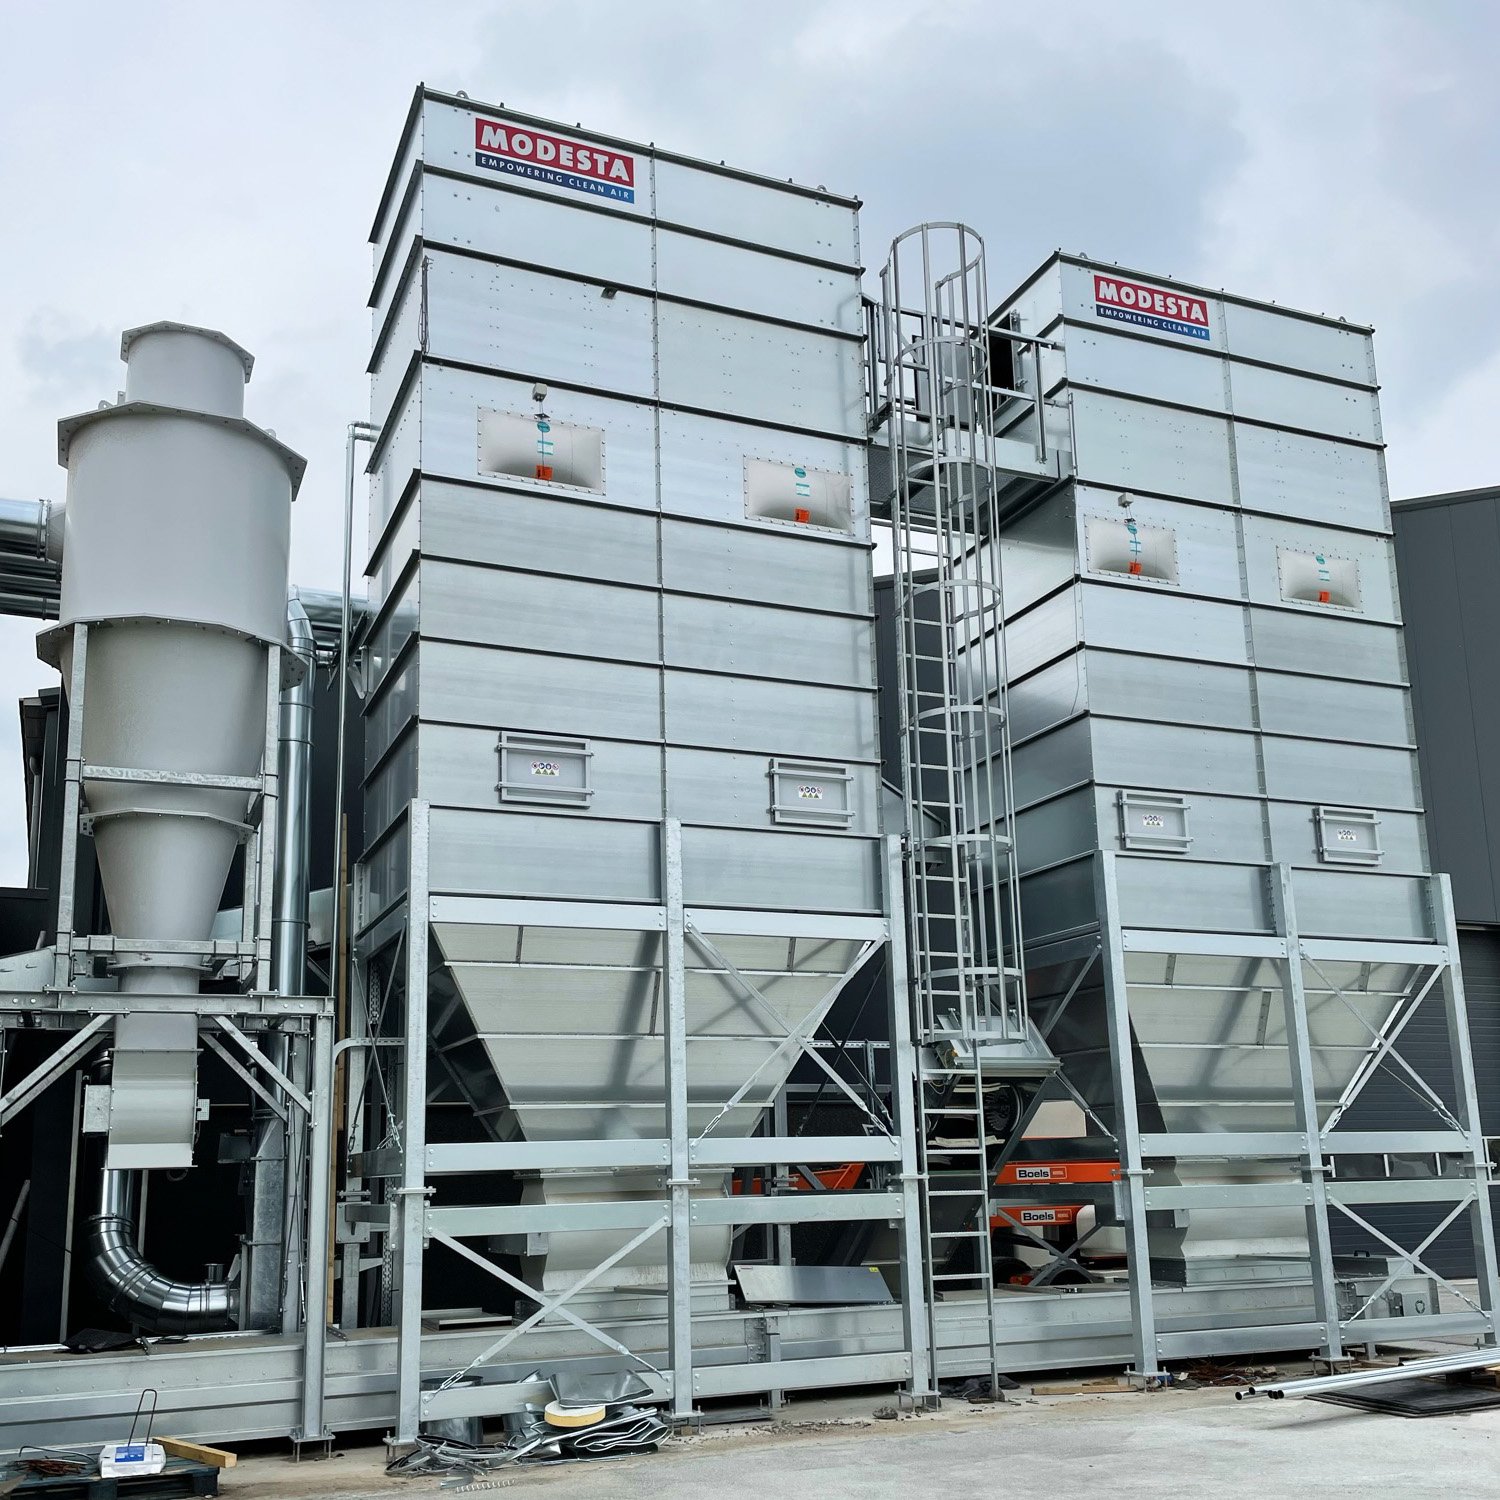 Modesta_Filters_Empowering_Clean_Air_Industrial_Filtration_Dust_Extraction_Collector_System_Deduster_CFB_Conveyor_Filter_with_Belt_IMG_6336.jpg